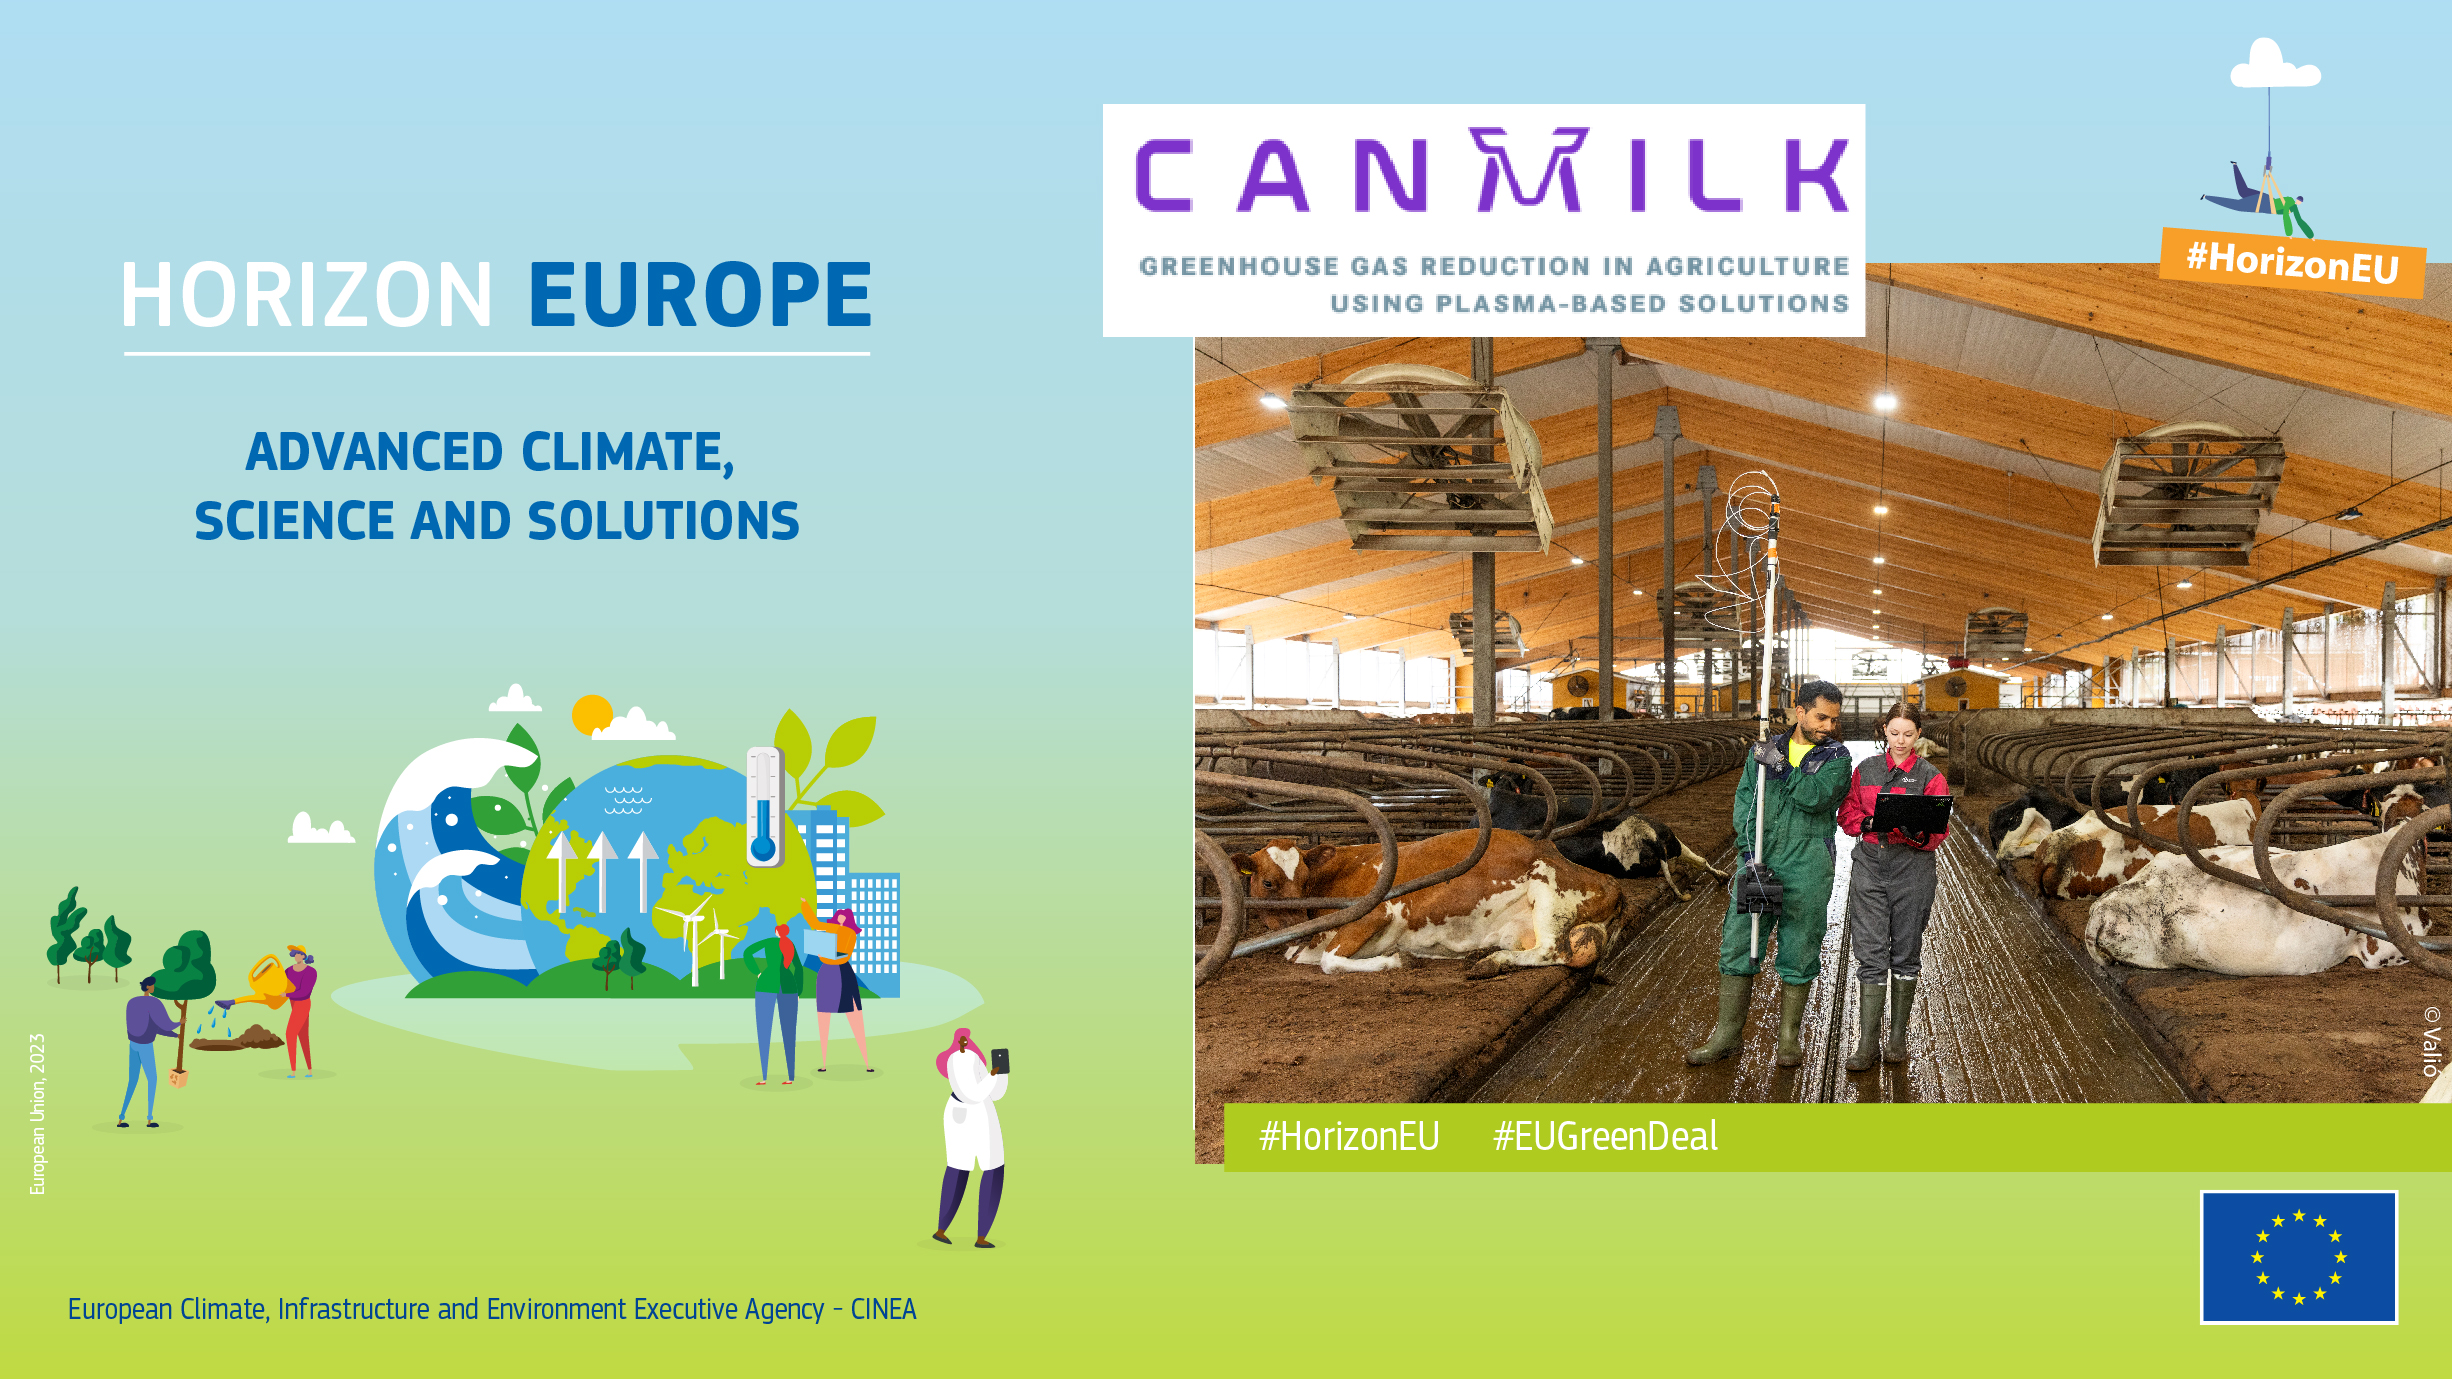 CANMILK - Carbon neutral milk with plasma-based solutions